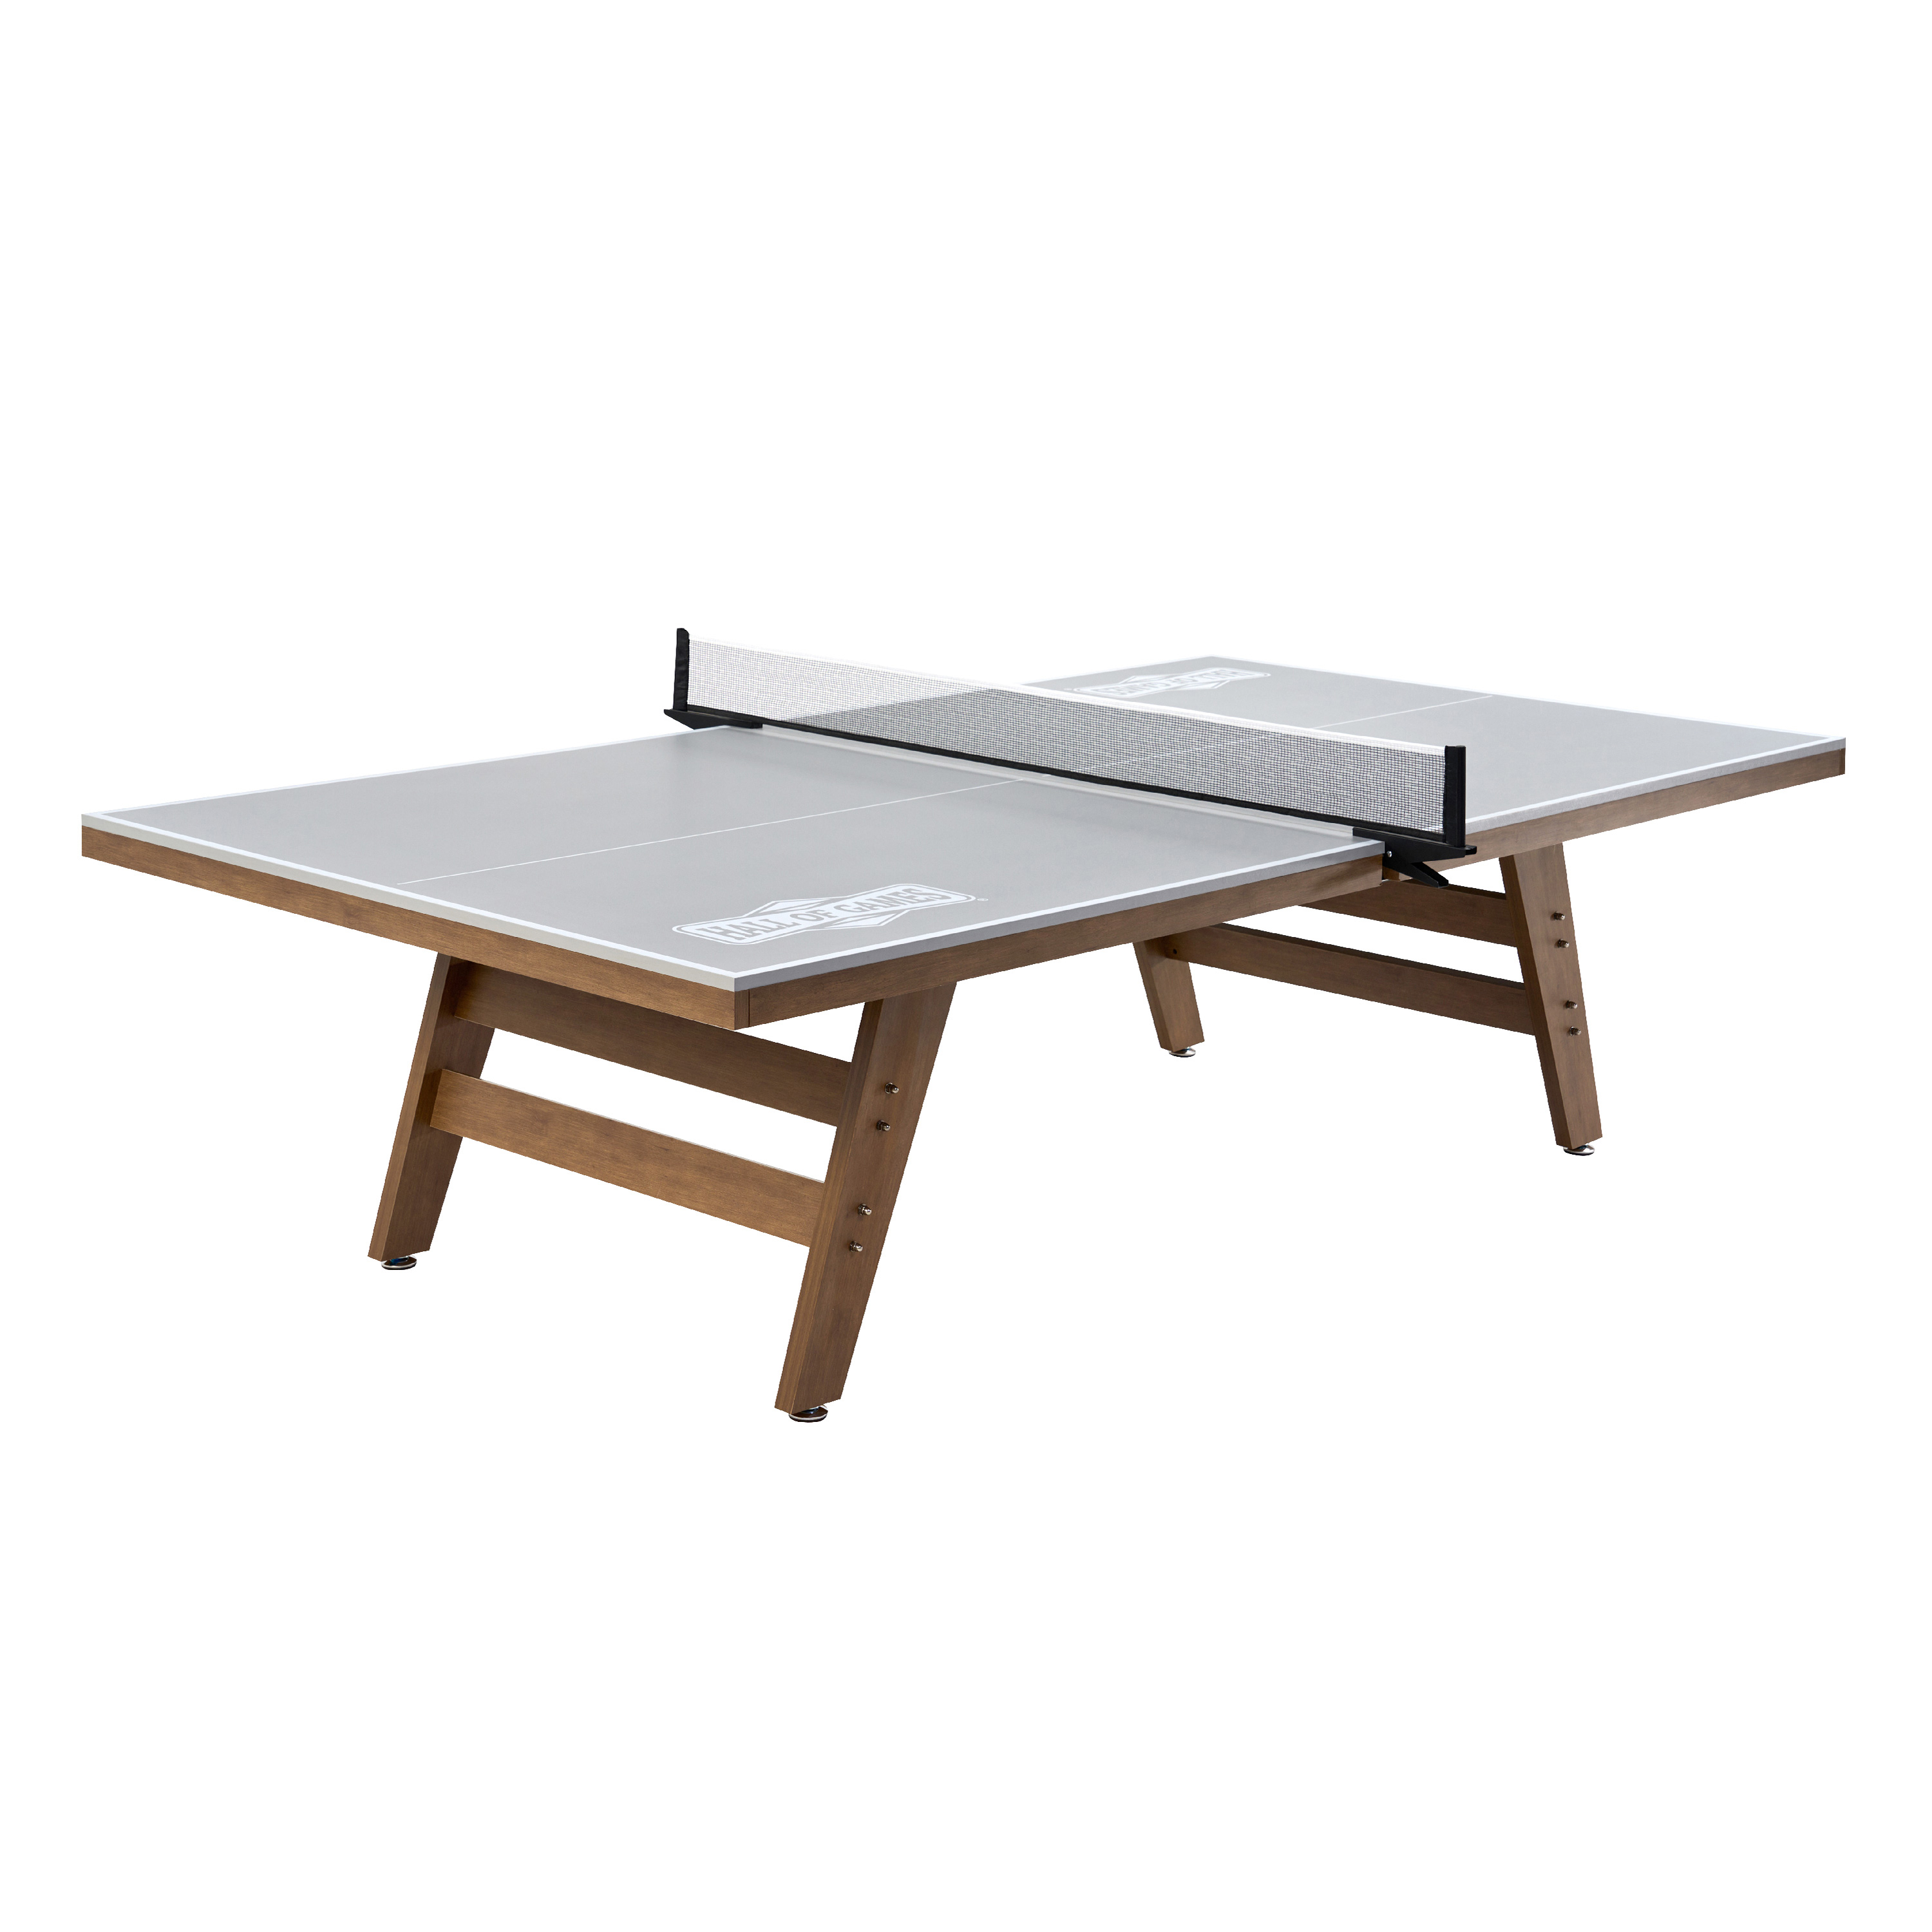 Hall of Games Regulation Size Indoor Table Tennis Table, 19mm Thick - image 1 of 9